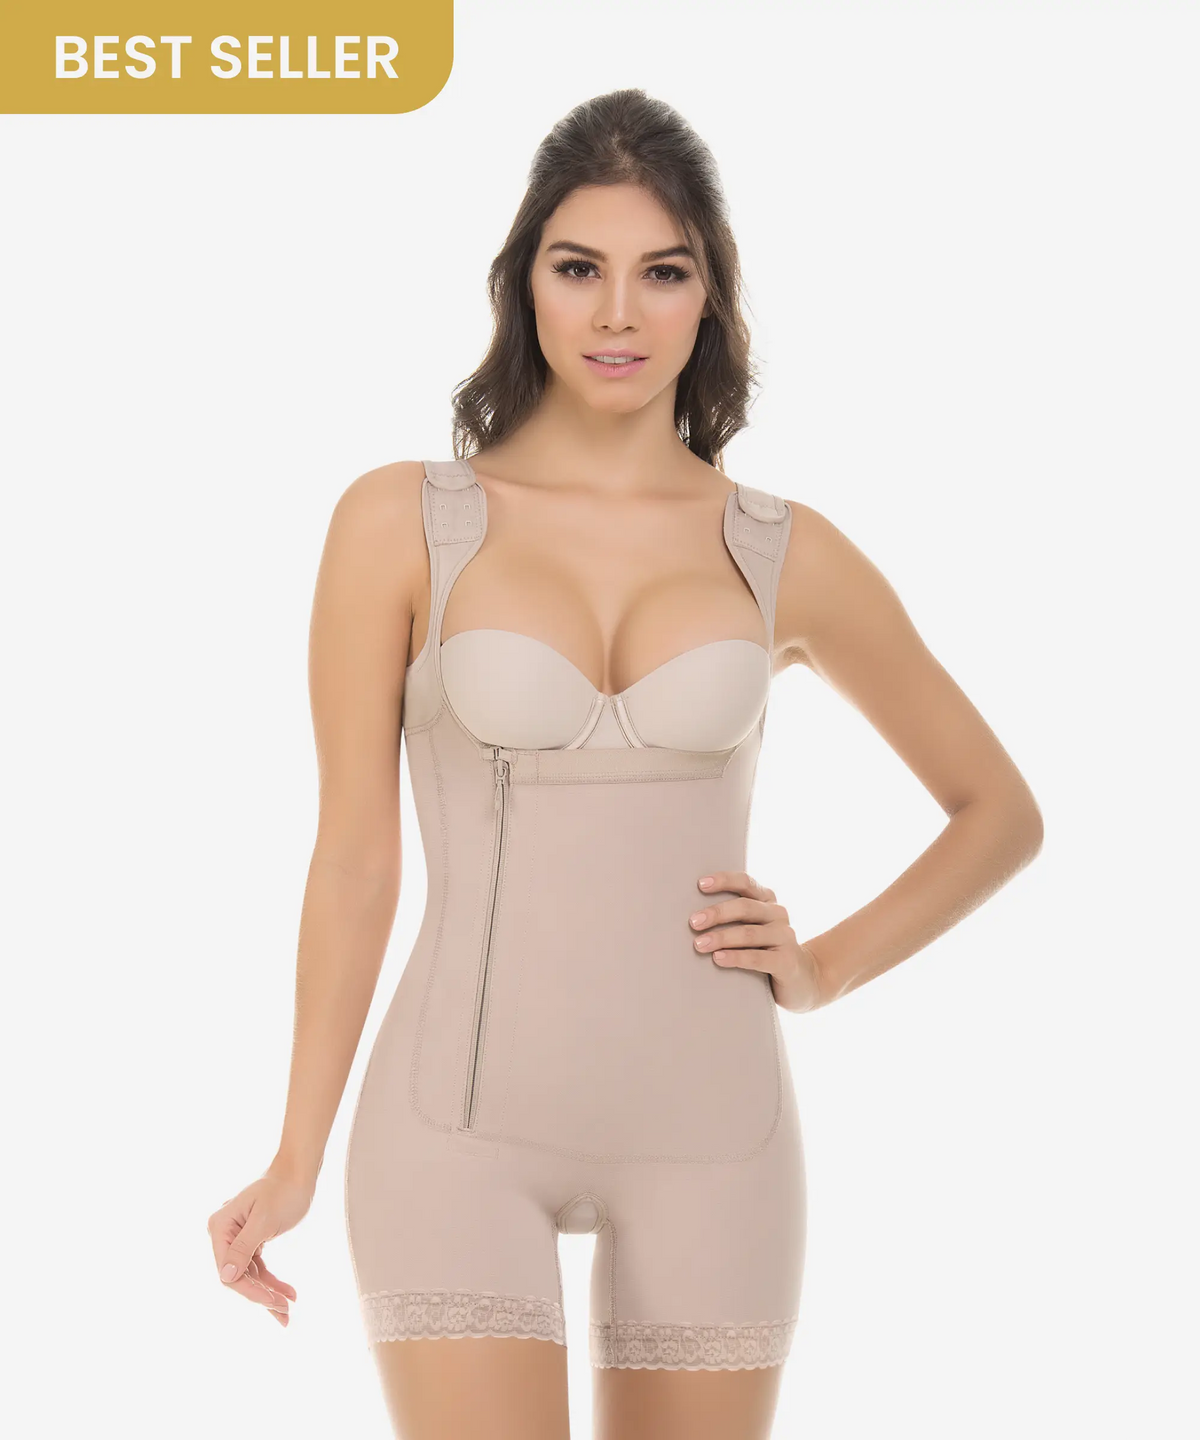 XS Hourglass Girdle Bodysuit Shapewear Women With Zipper Crotch Strong  Compression Post Surgery Body Shaper Tummy And But Lifter